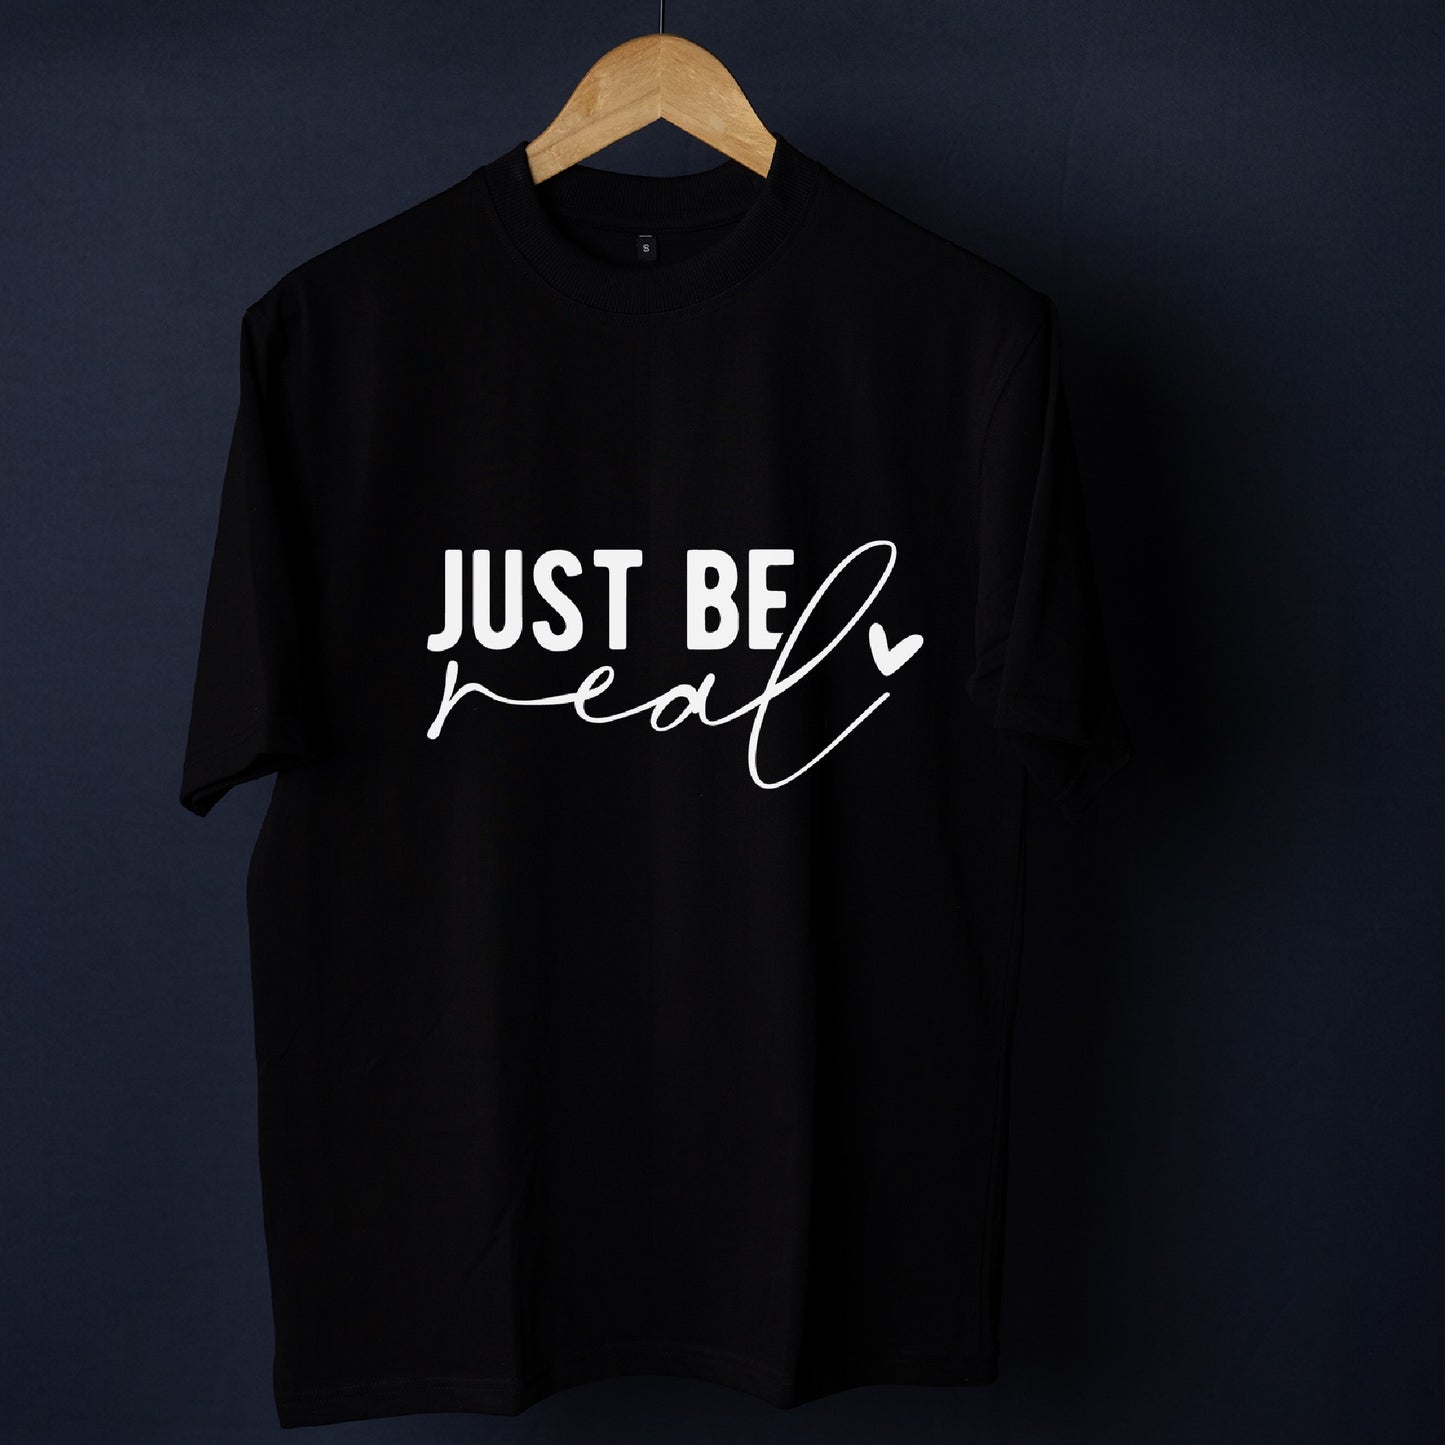 Just Be Real (Oversized-Unisex)